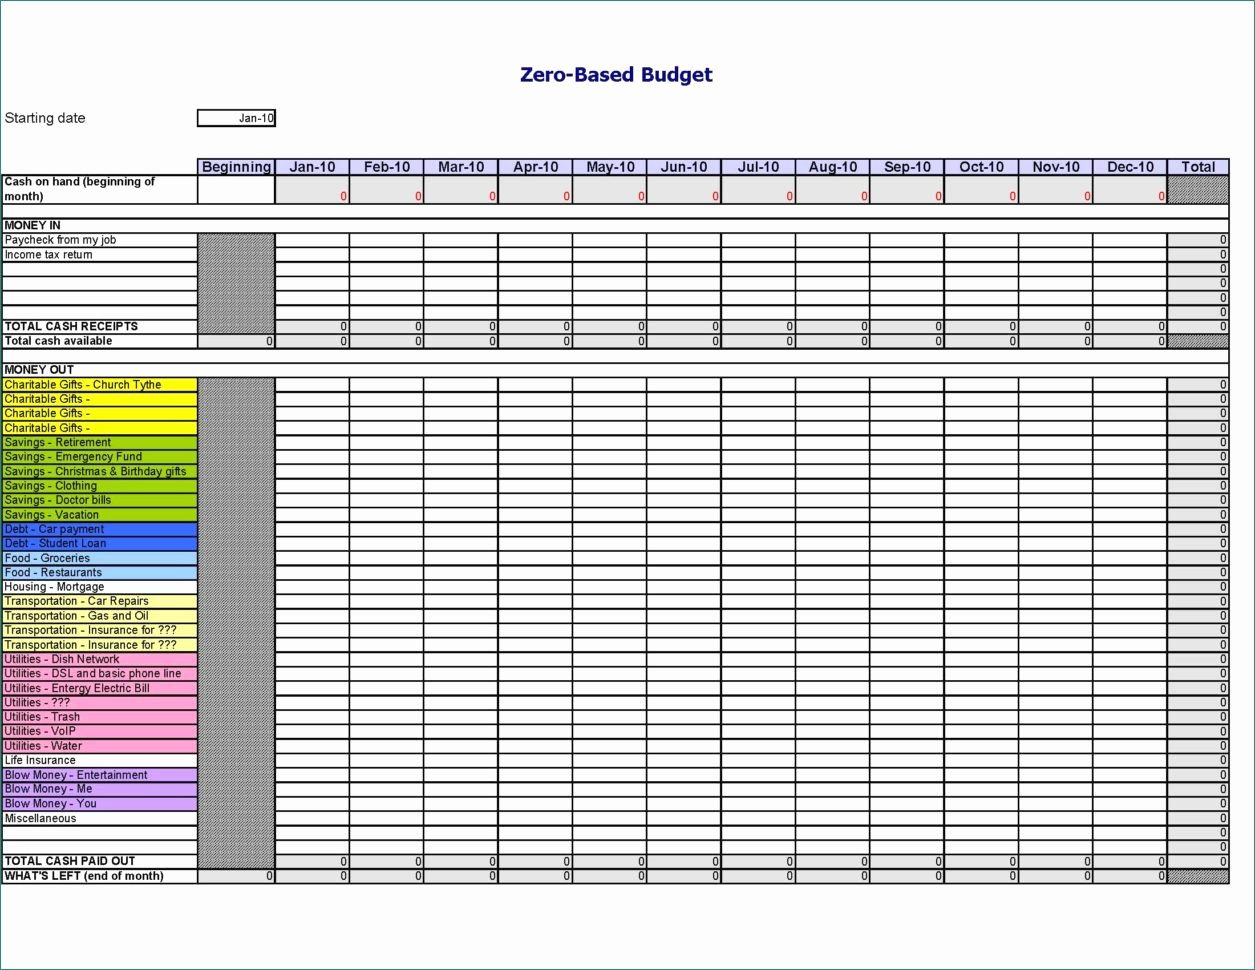 Printable Spreadsheet Within Free Printable Spreadsheet With Lines Awal